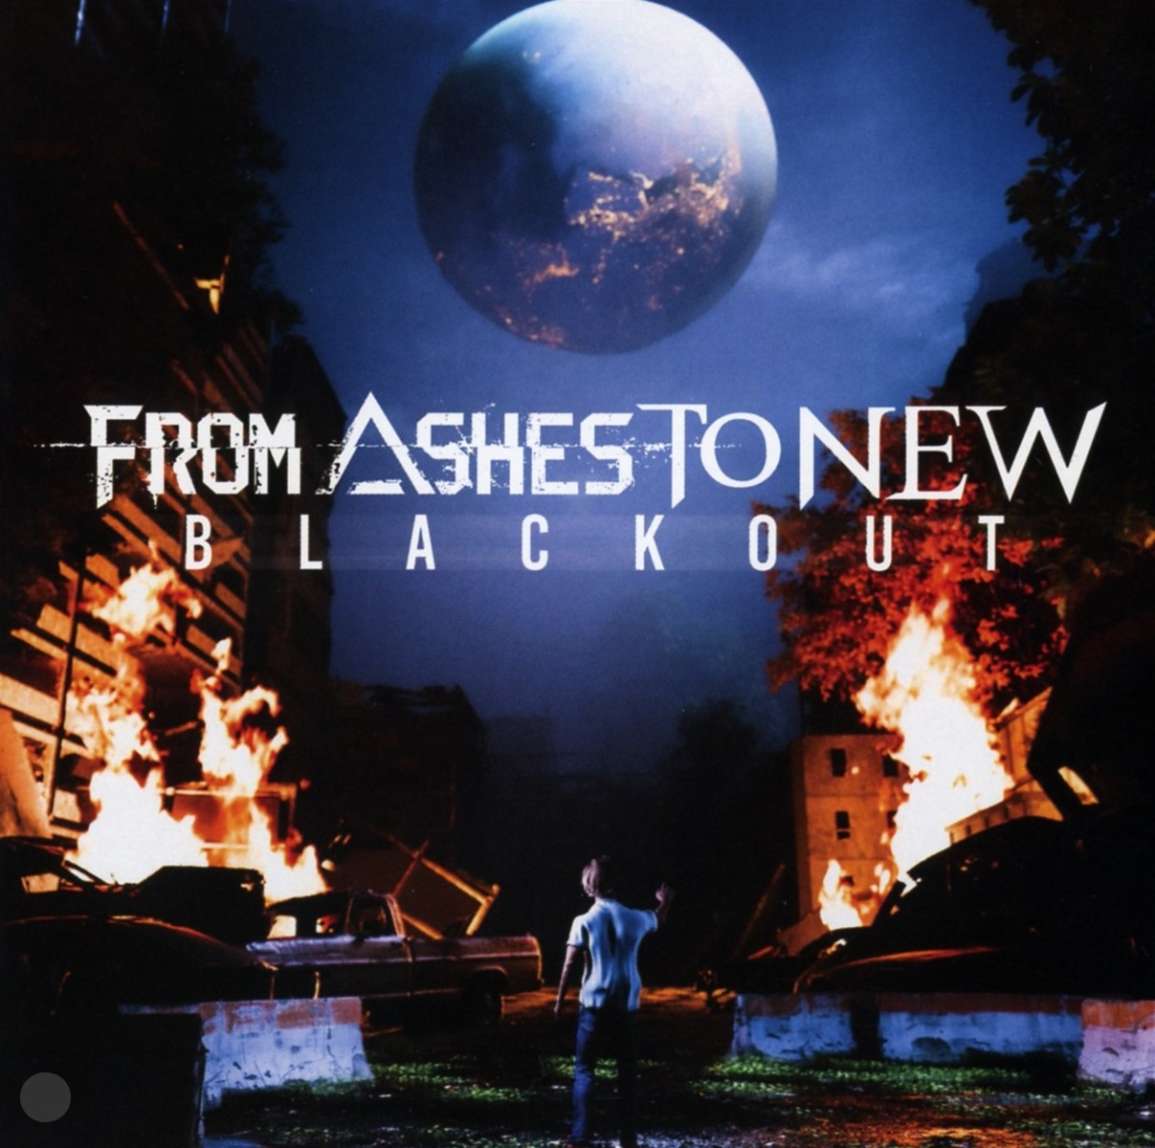 FROM ASHES TO NEW - Blackout